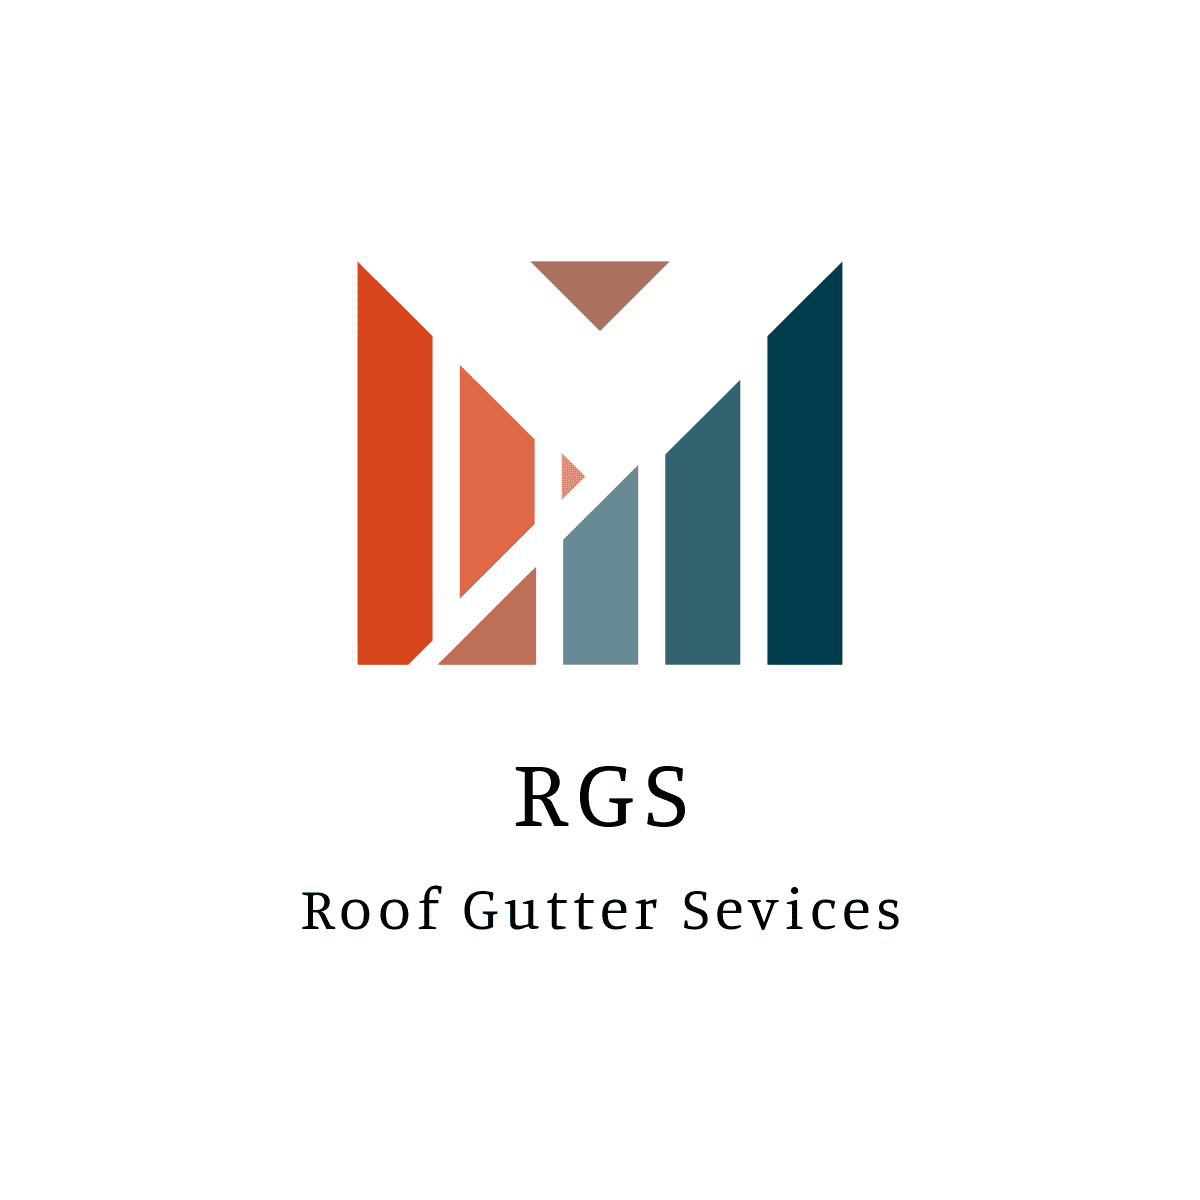 Roof Gutter Services